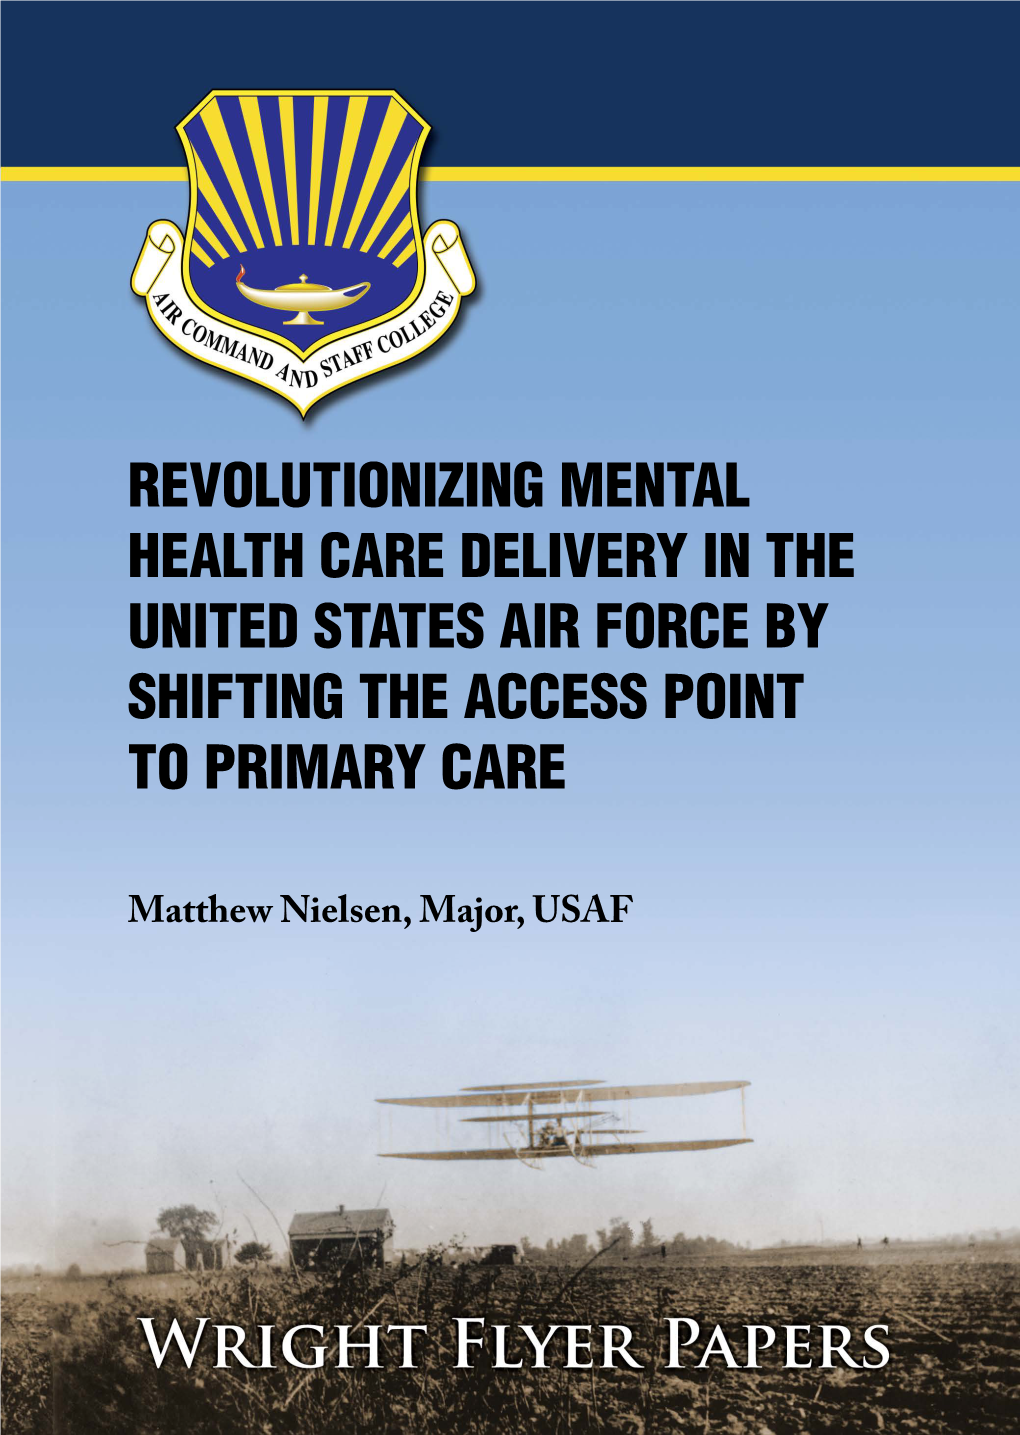 Revolutionizing Mental Health Care Delivery in the United States Air Force by Shifting the Access Point to Primary Care